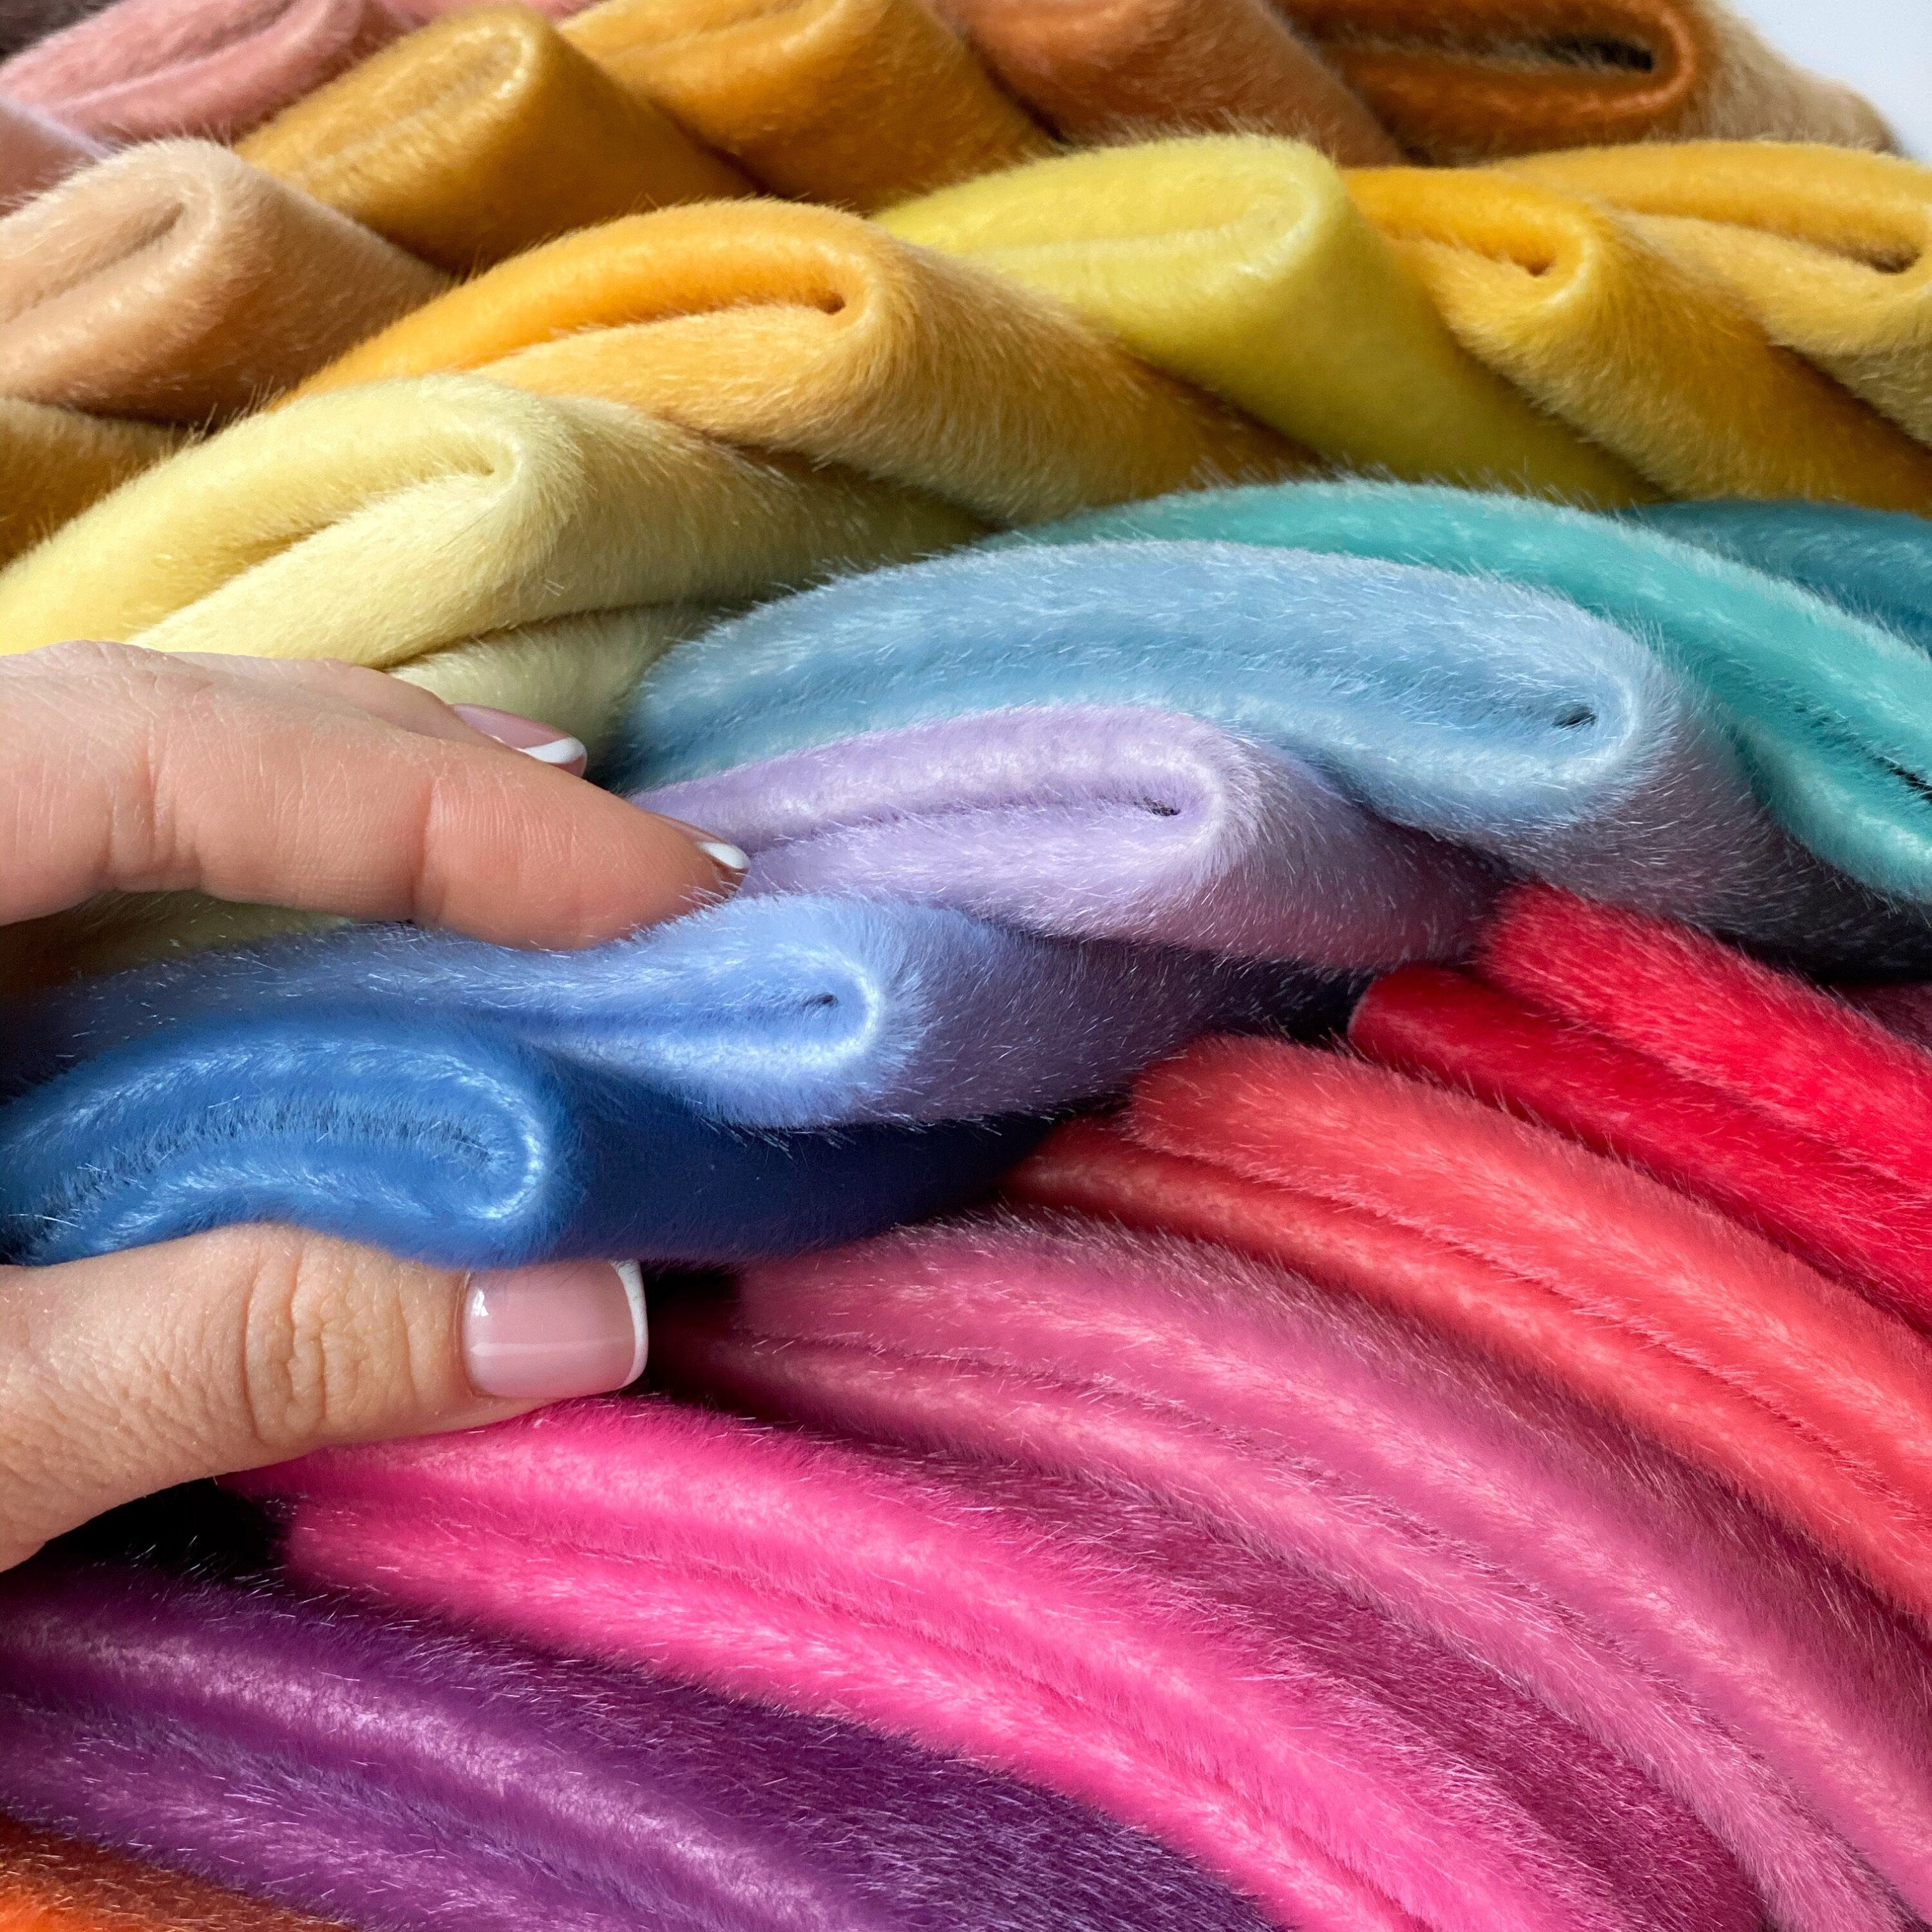 Magic box of 36 the most popular hand dyed colored TSminibears fabrics for making toys, premium quality for crafting, craft kit, sewing kits